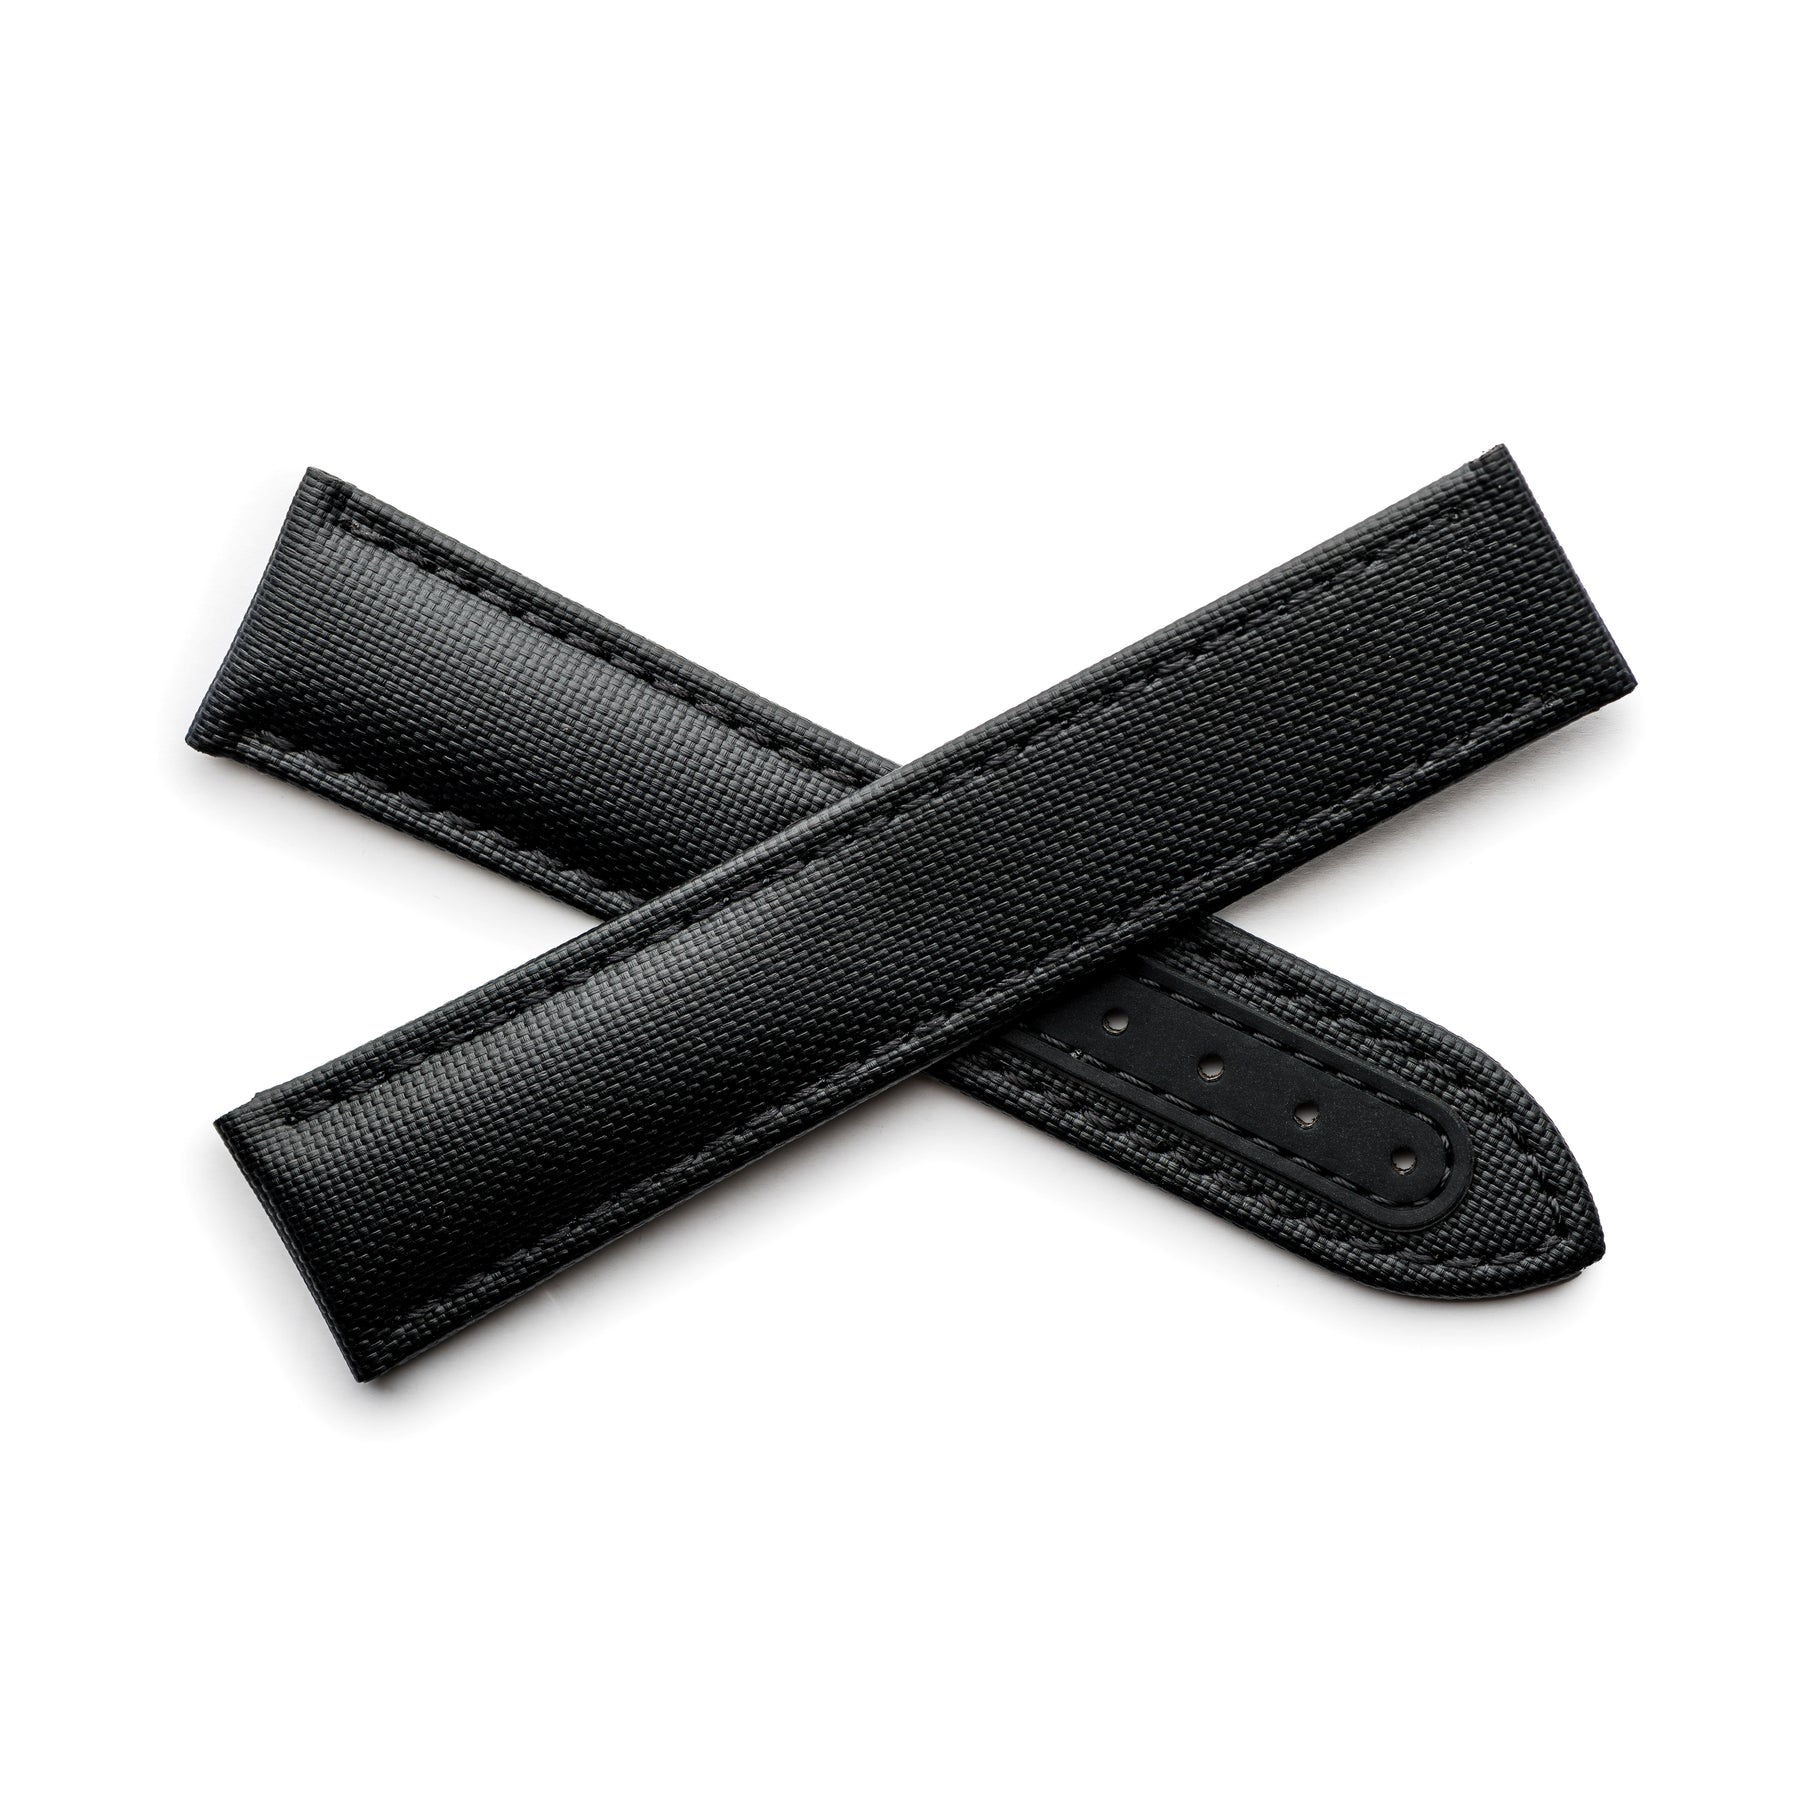 Loop-Less Black Sailcloth Watch Strap with Black Stitching